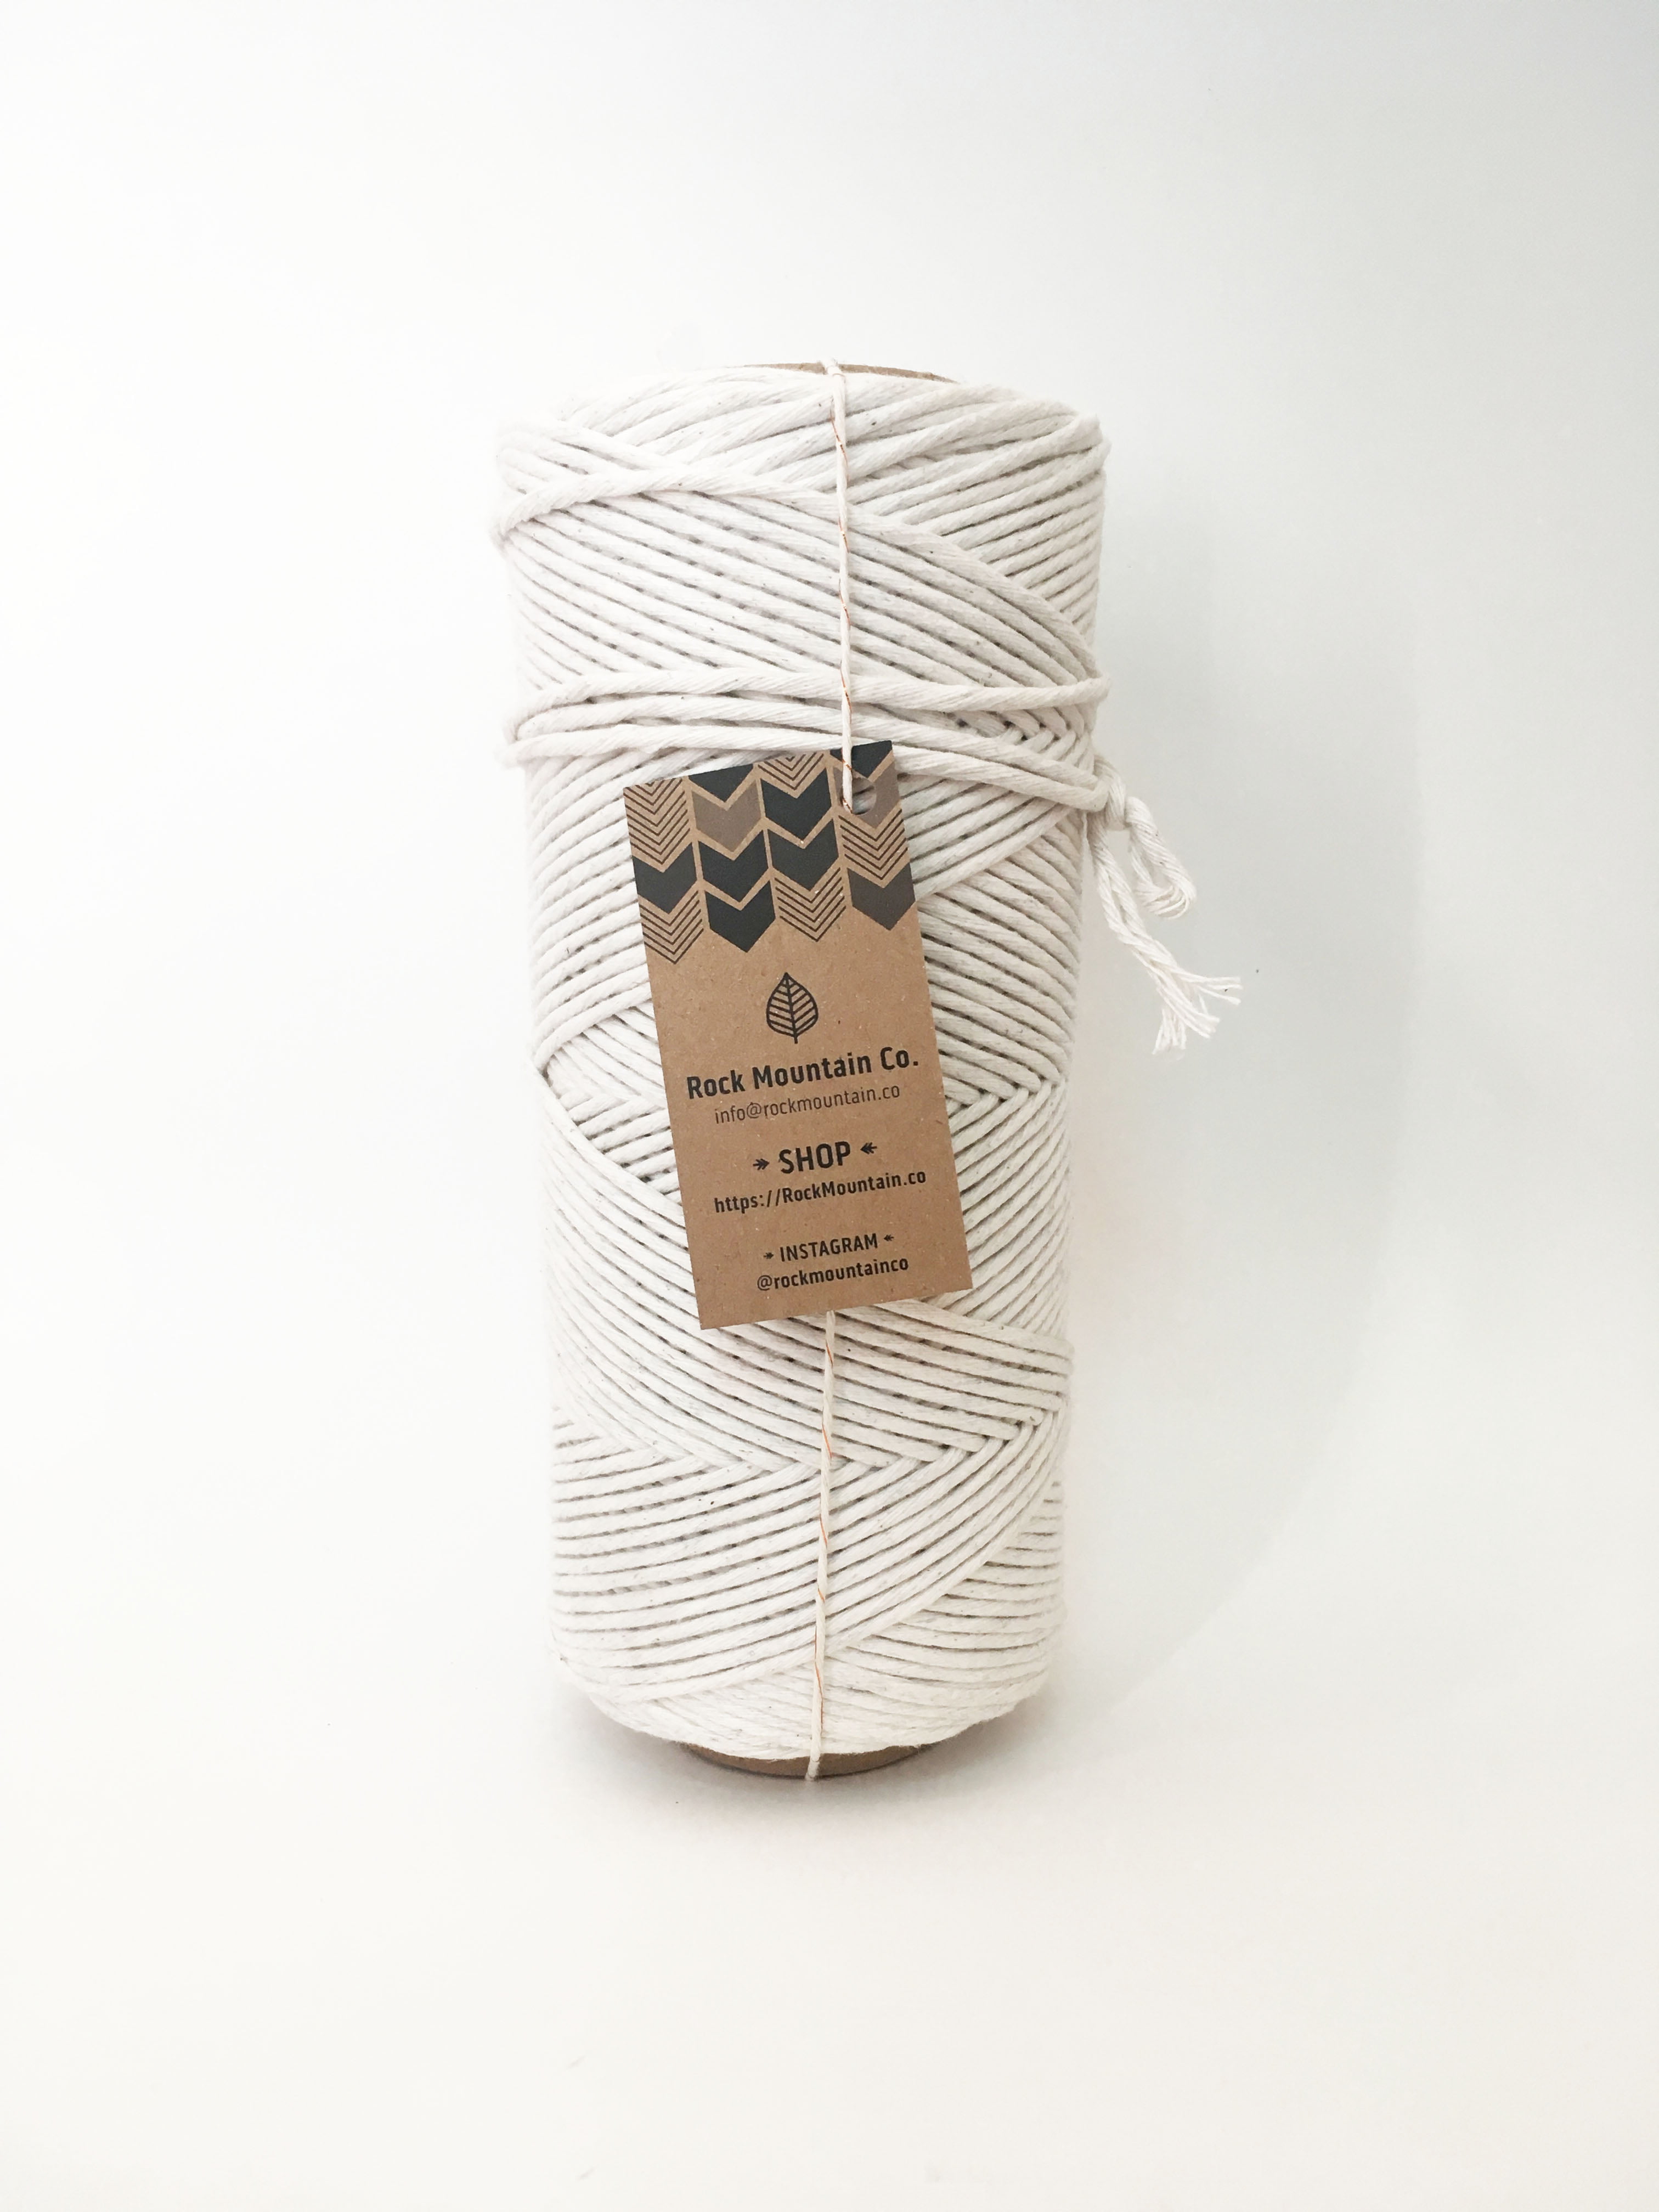 5mm - Macrame Cotton Cord / Wholesale Available - Mary Maker Studio -  Macrame & Weaving Supplies and Education.